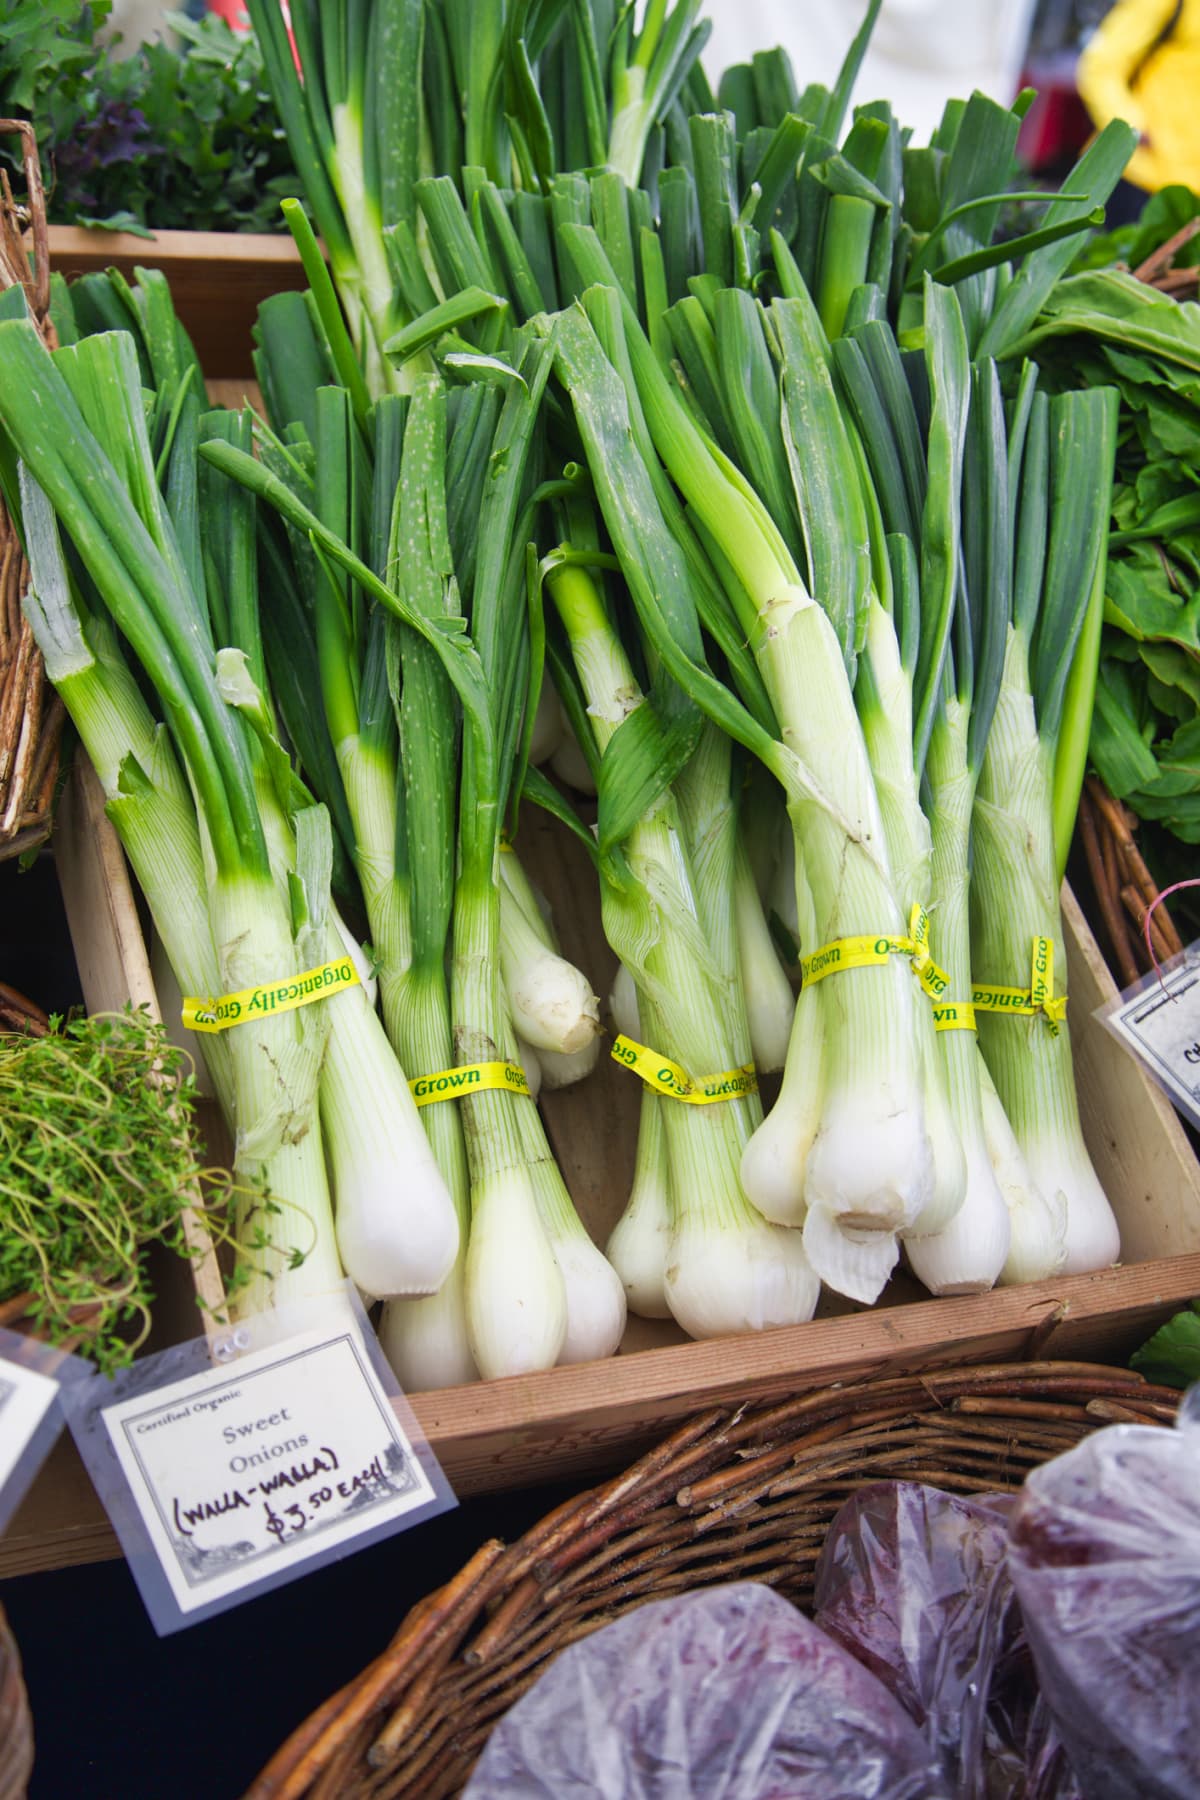 Bundles of green onions on display at a market